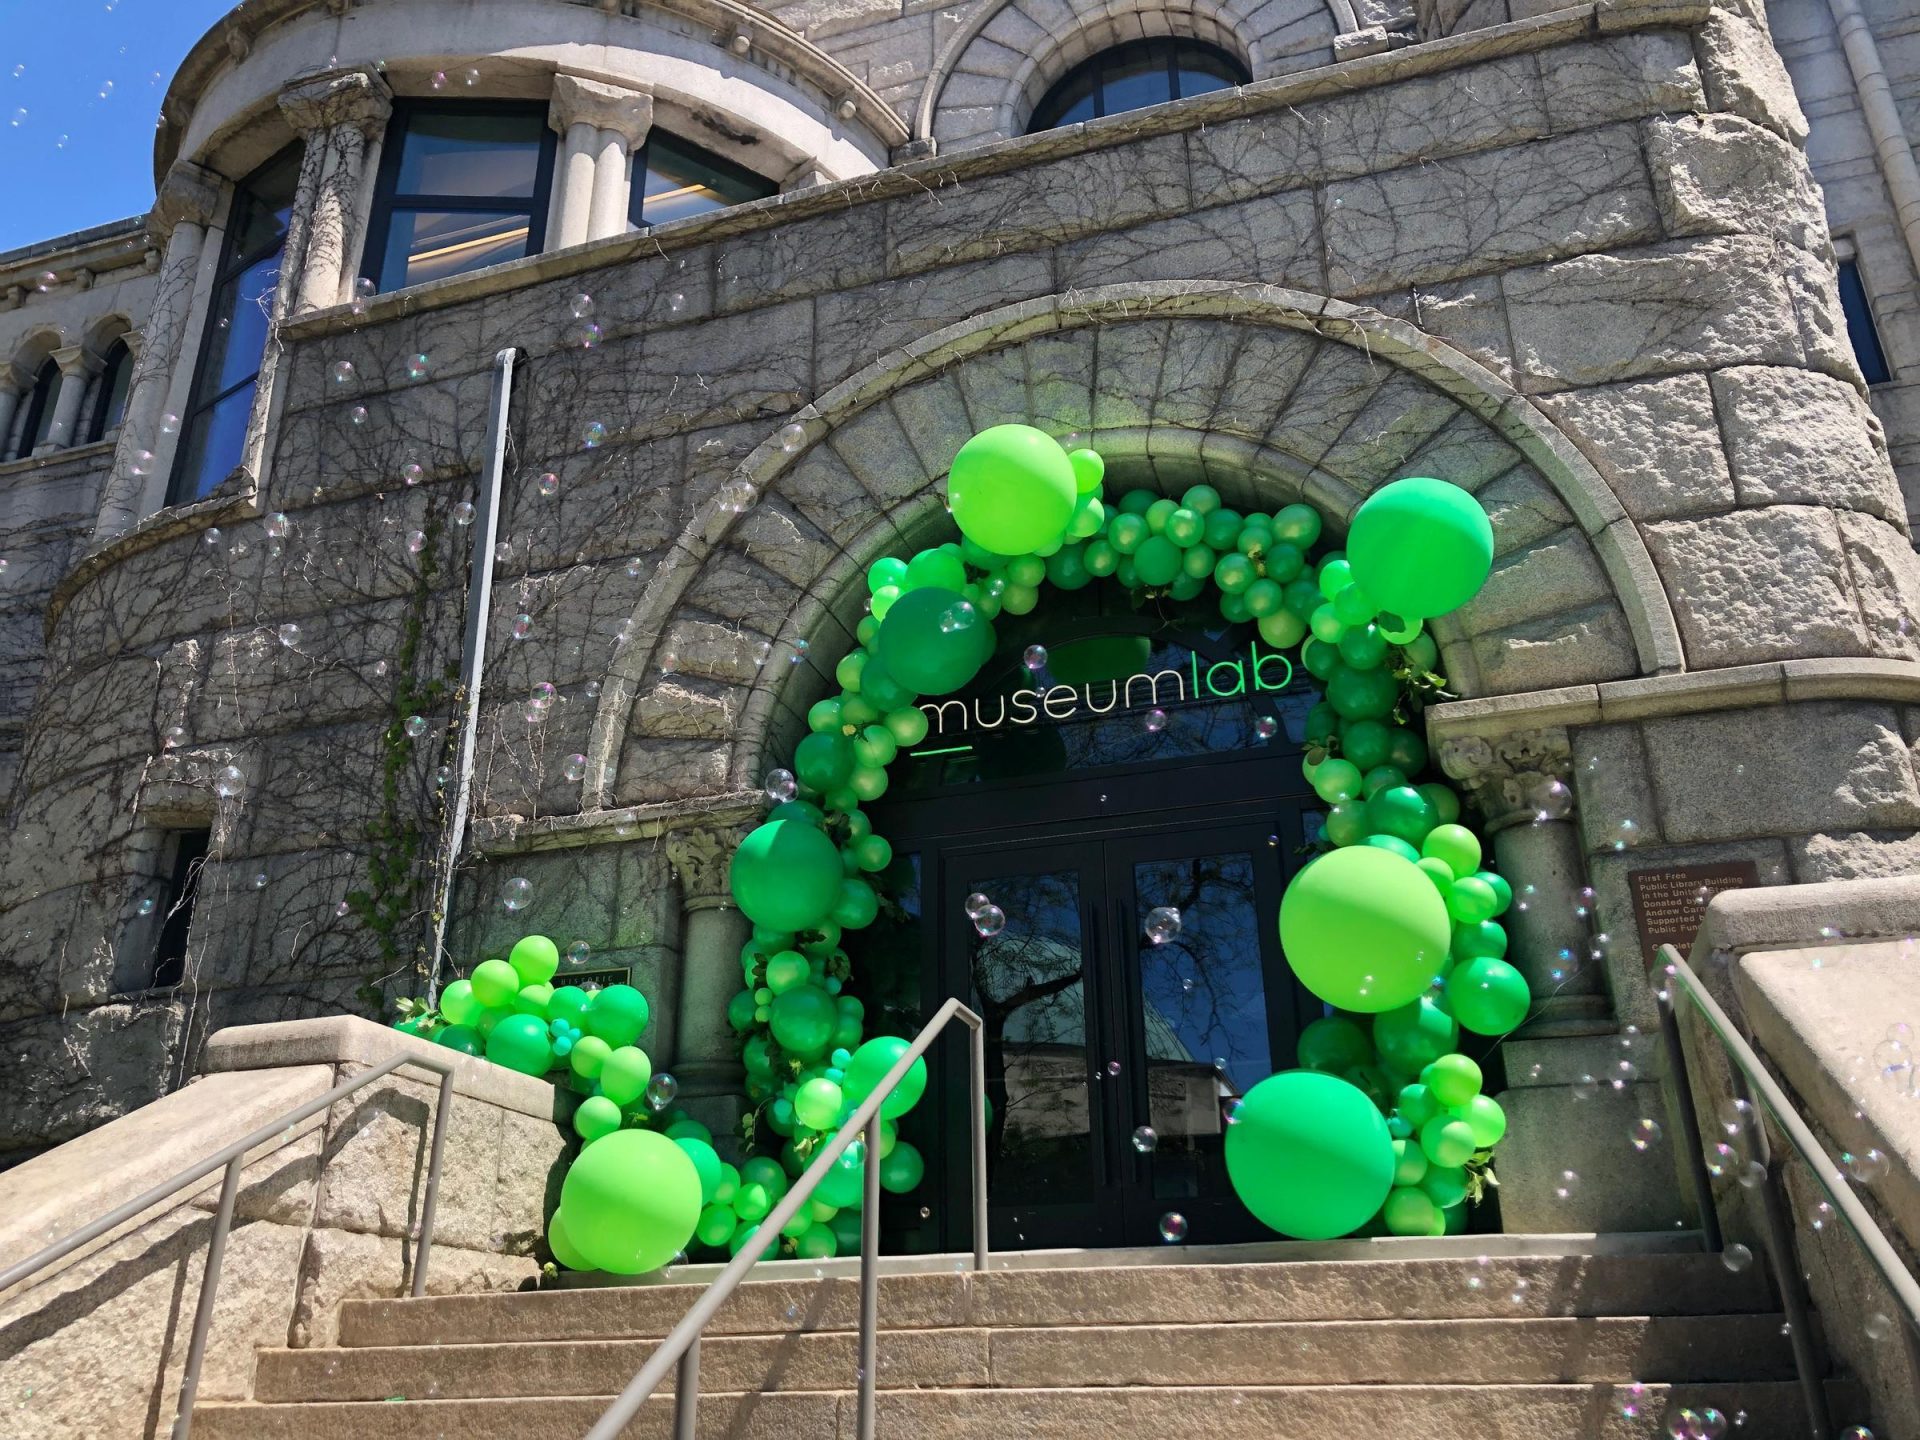 The Children's Museum Museum Lab opened in April 2019.